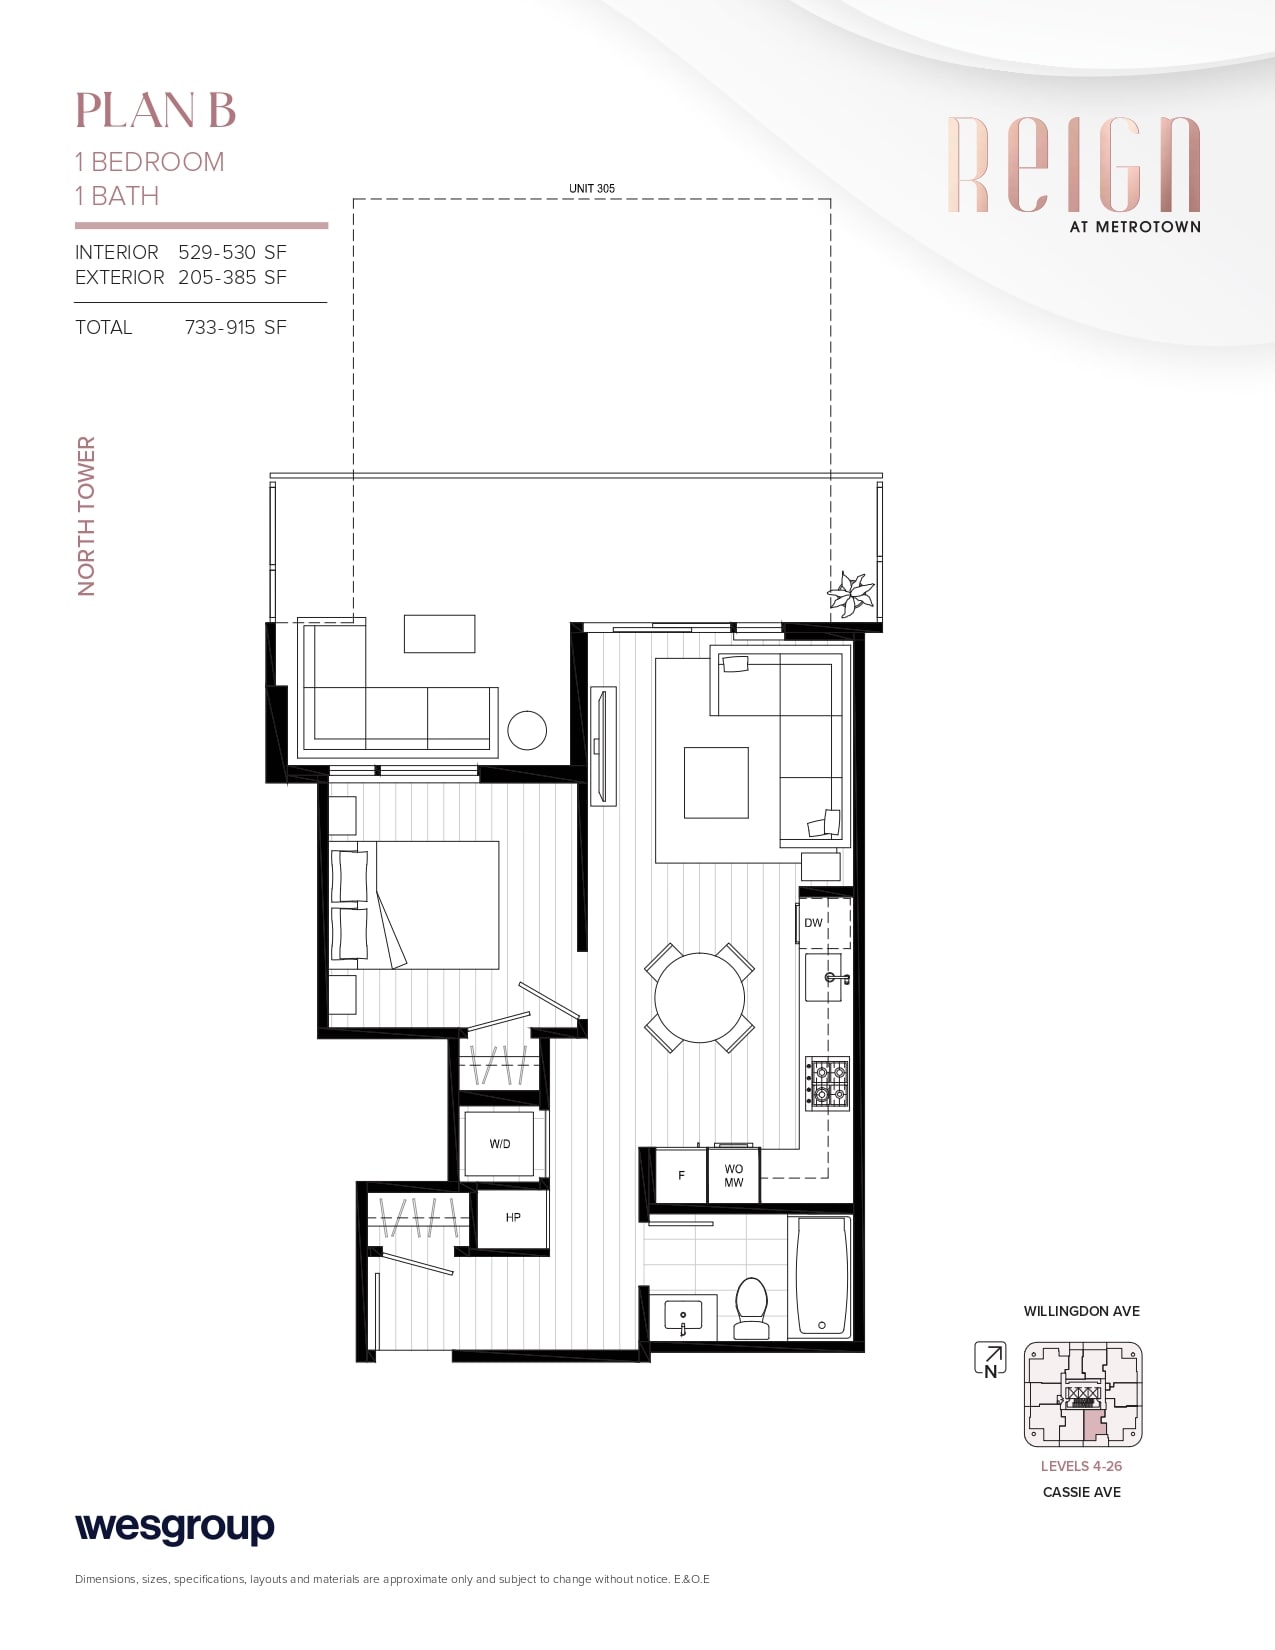 Reign_-_North_Tower_-_Typical_Floorplans_-_FINAL__page-0002-min.jpg